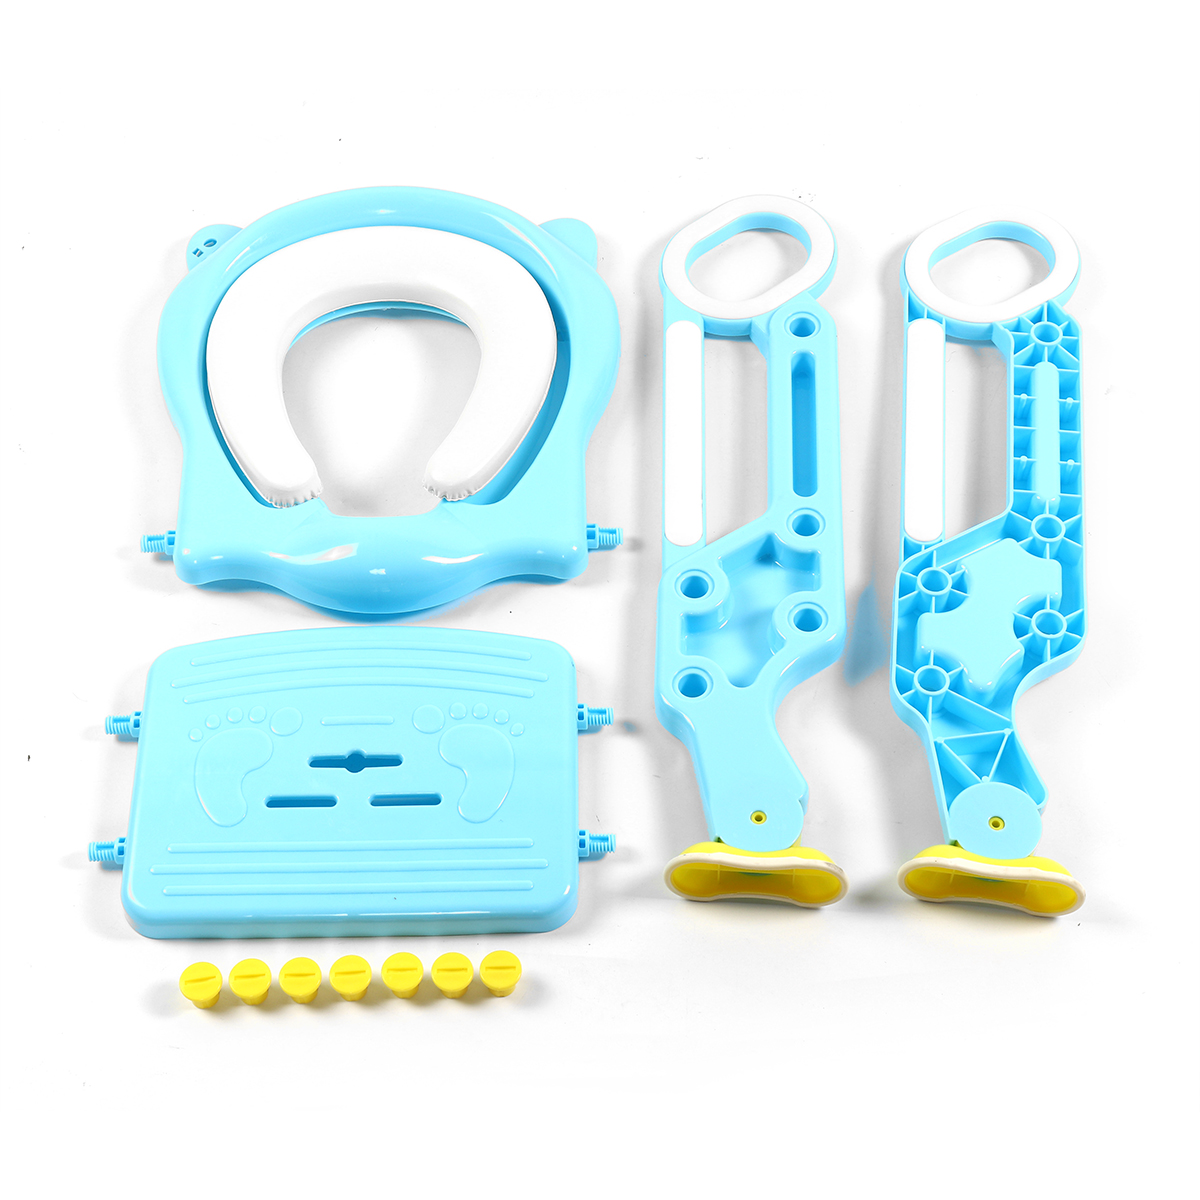 Kids-Potty-Training-Seat-with-Step-Stool-Ladder-For-Child-Toddler-Toilet-Chair-1724111